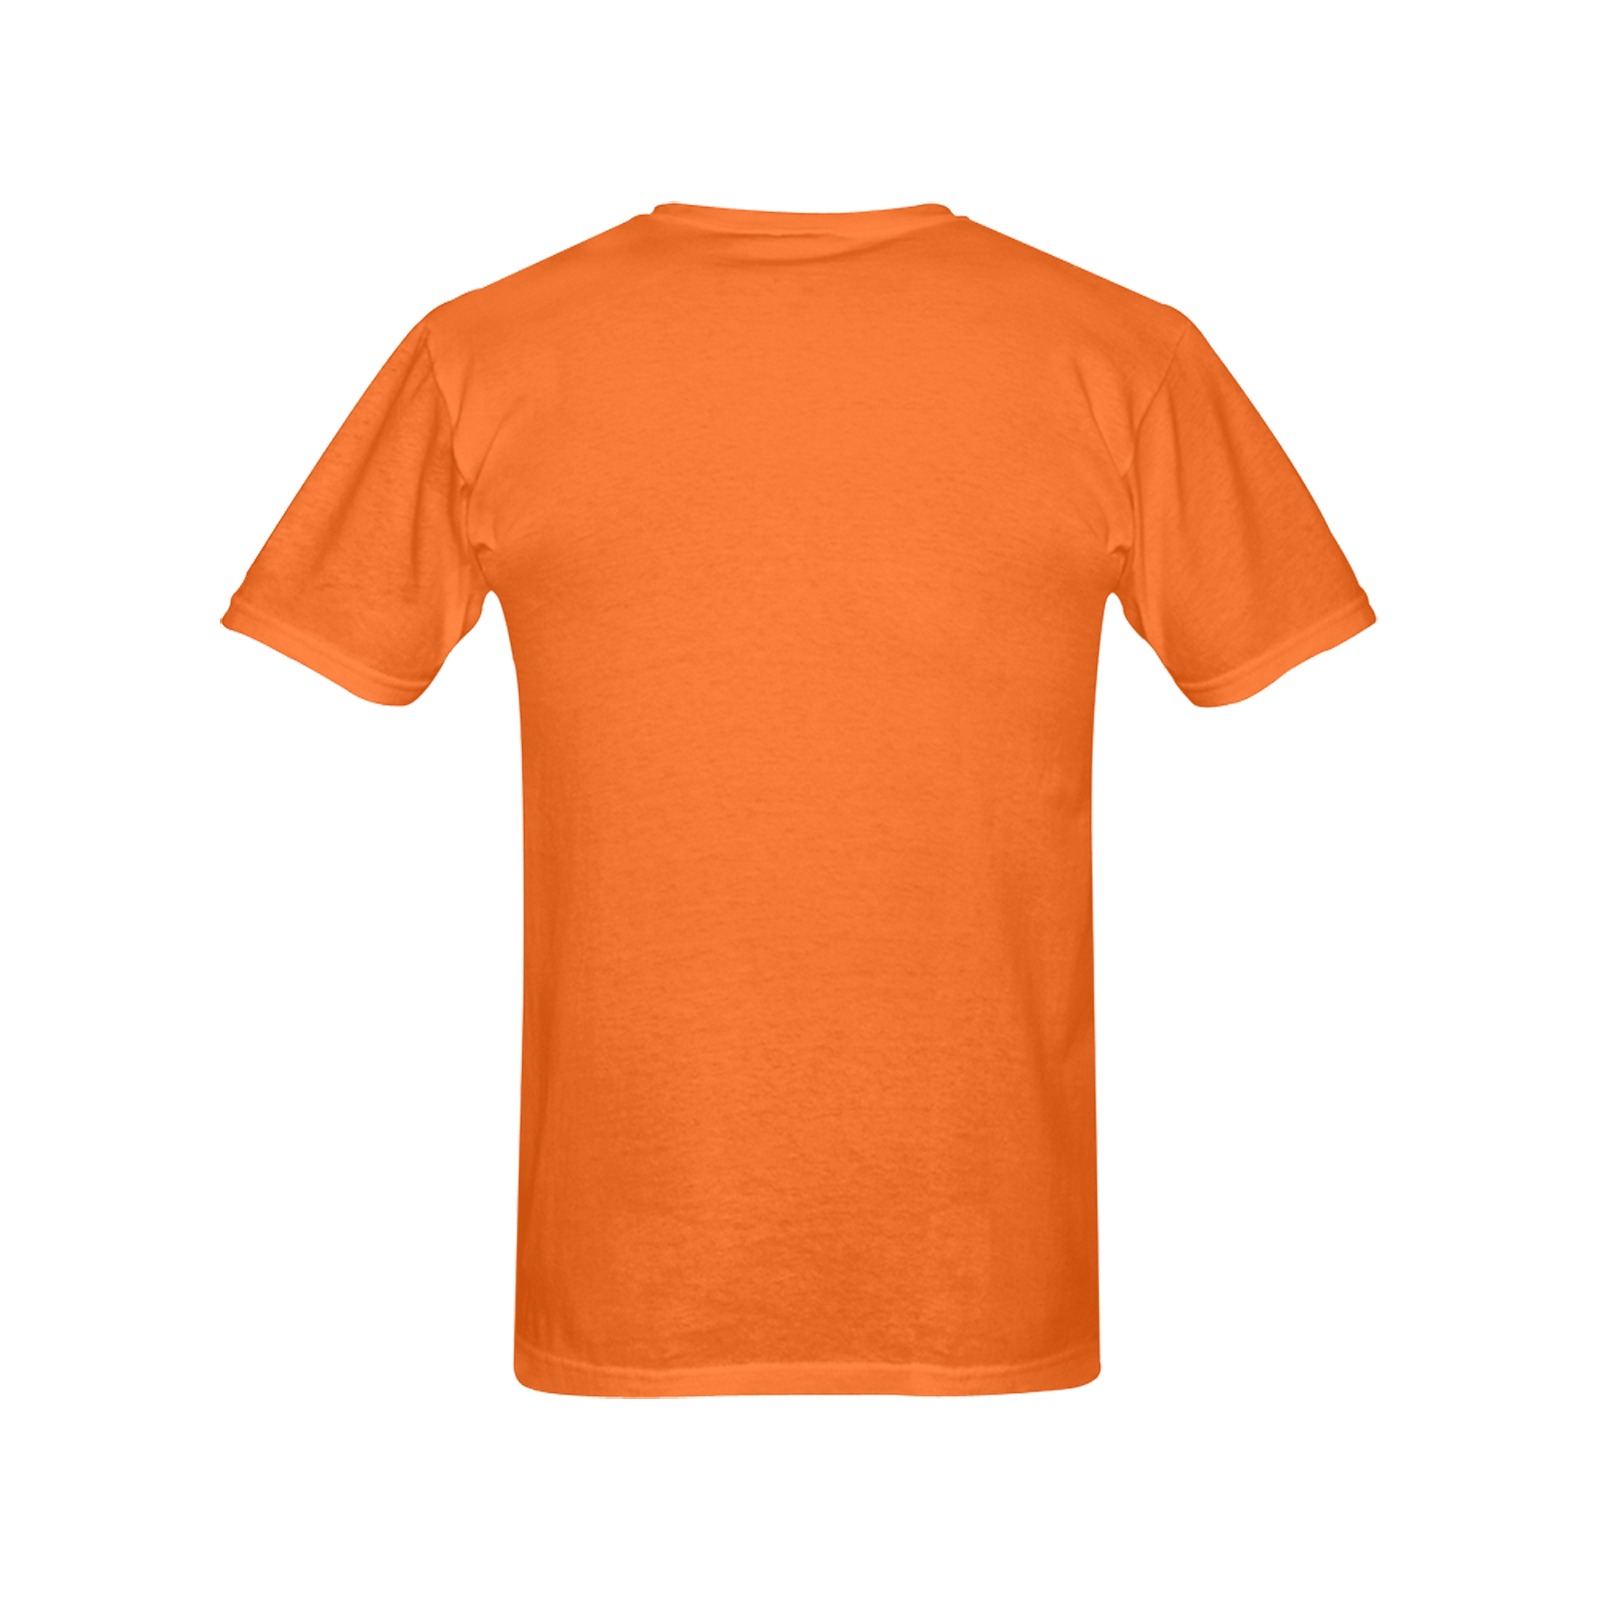 It's A Boy! Stars Orange Men's T-Shirt in USA Size (Two Sides Printing)